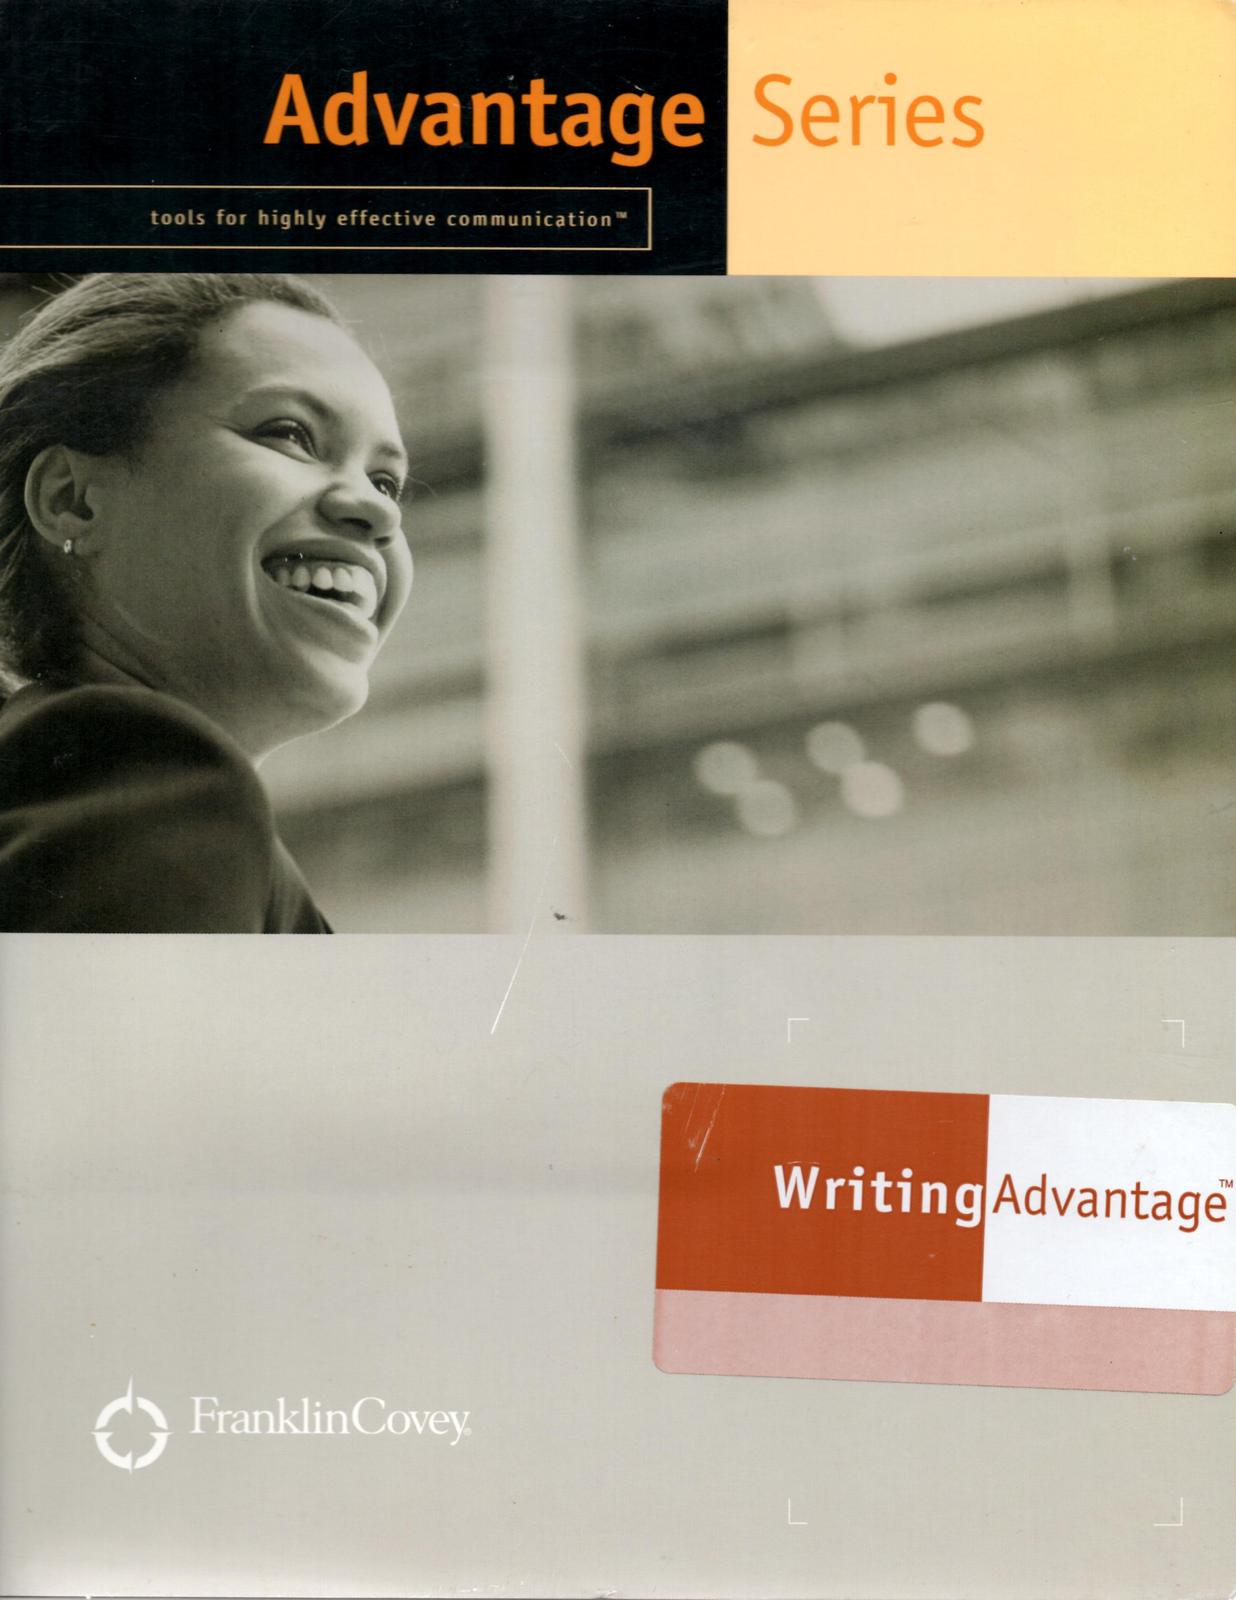 Primary image for  Advantage Series; Writing Advantage, tools for highly effective communications